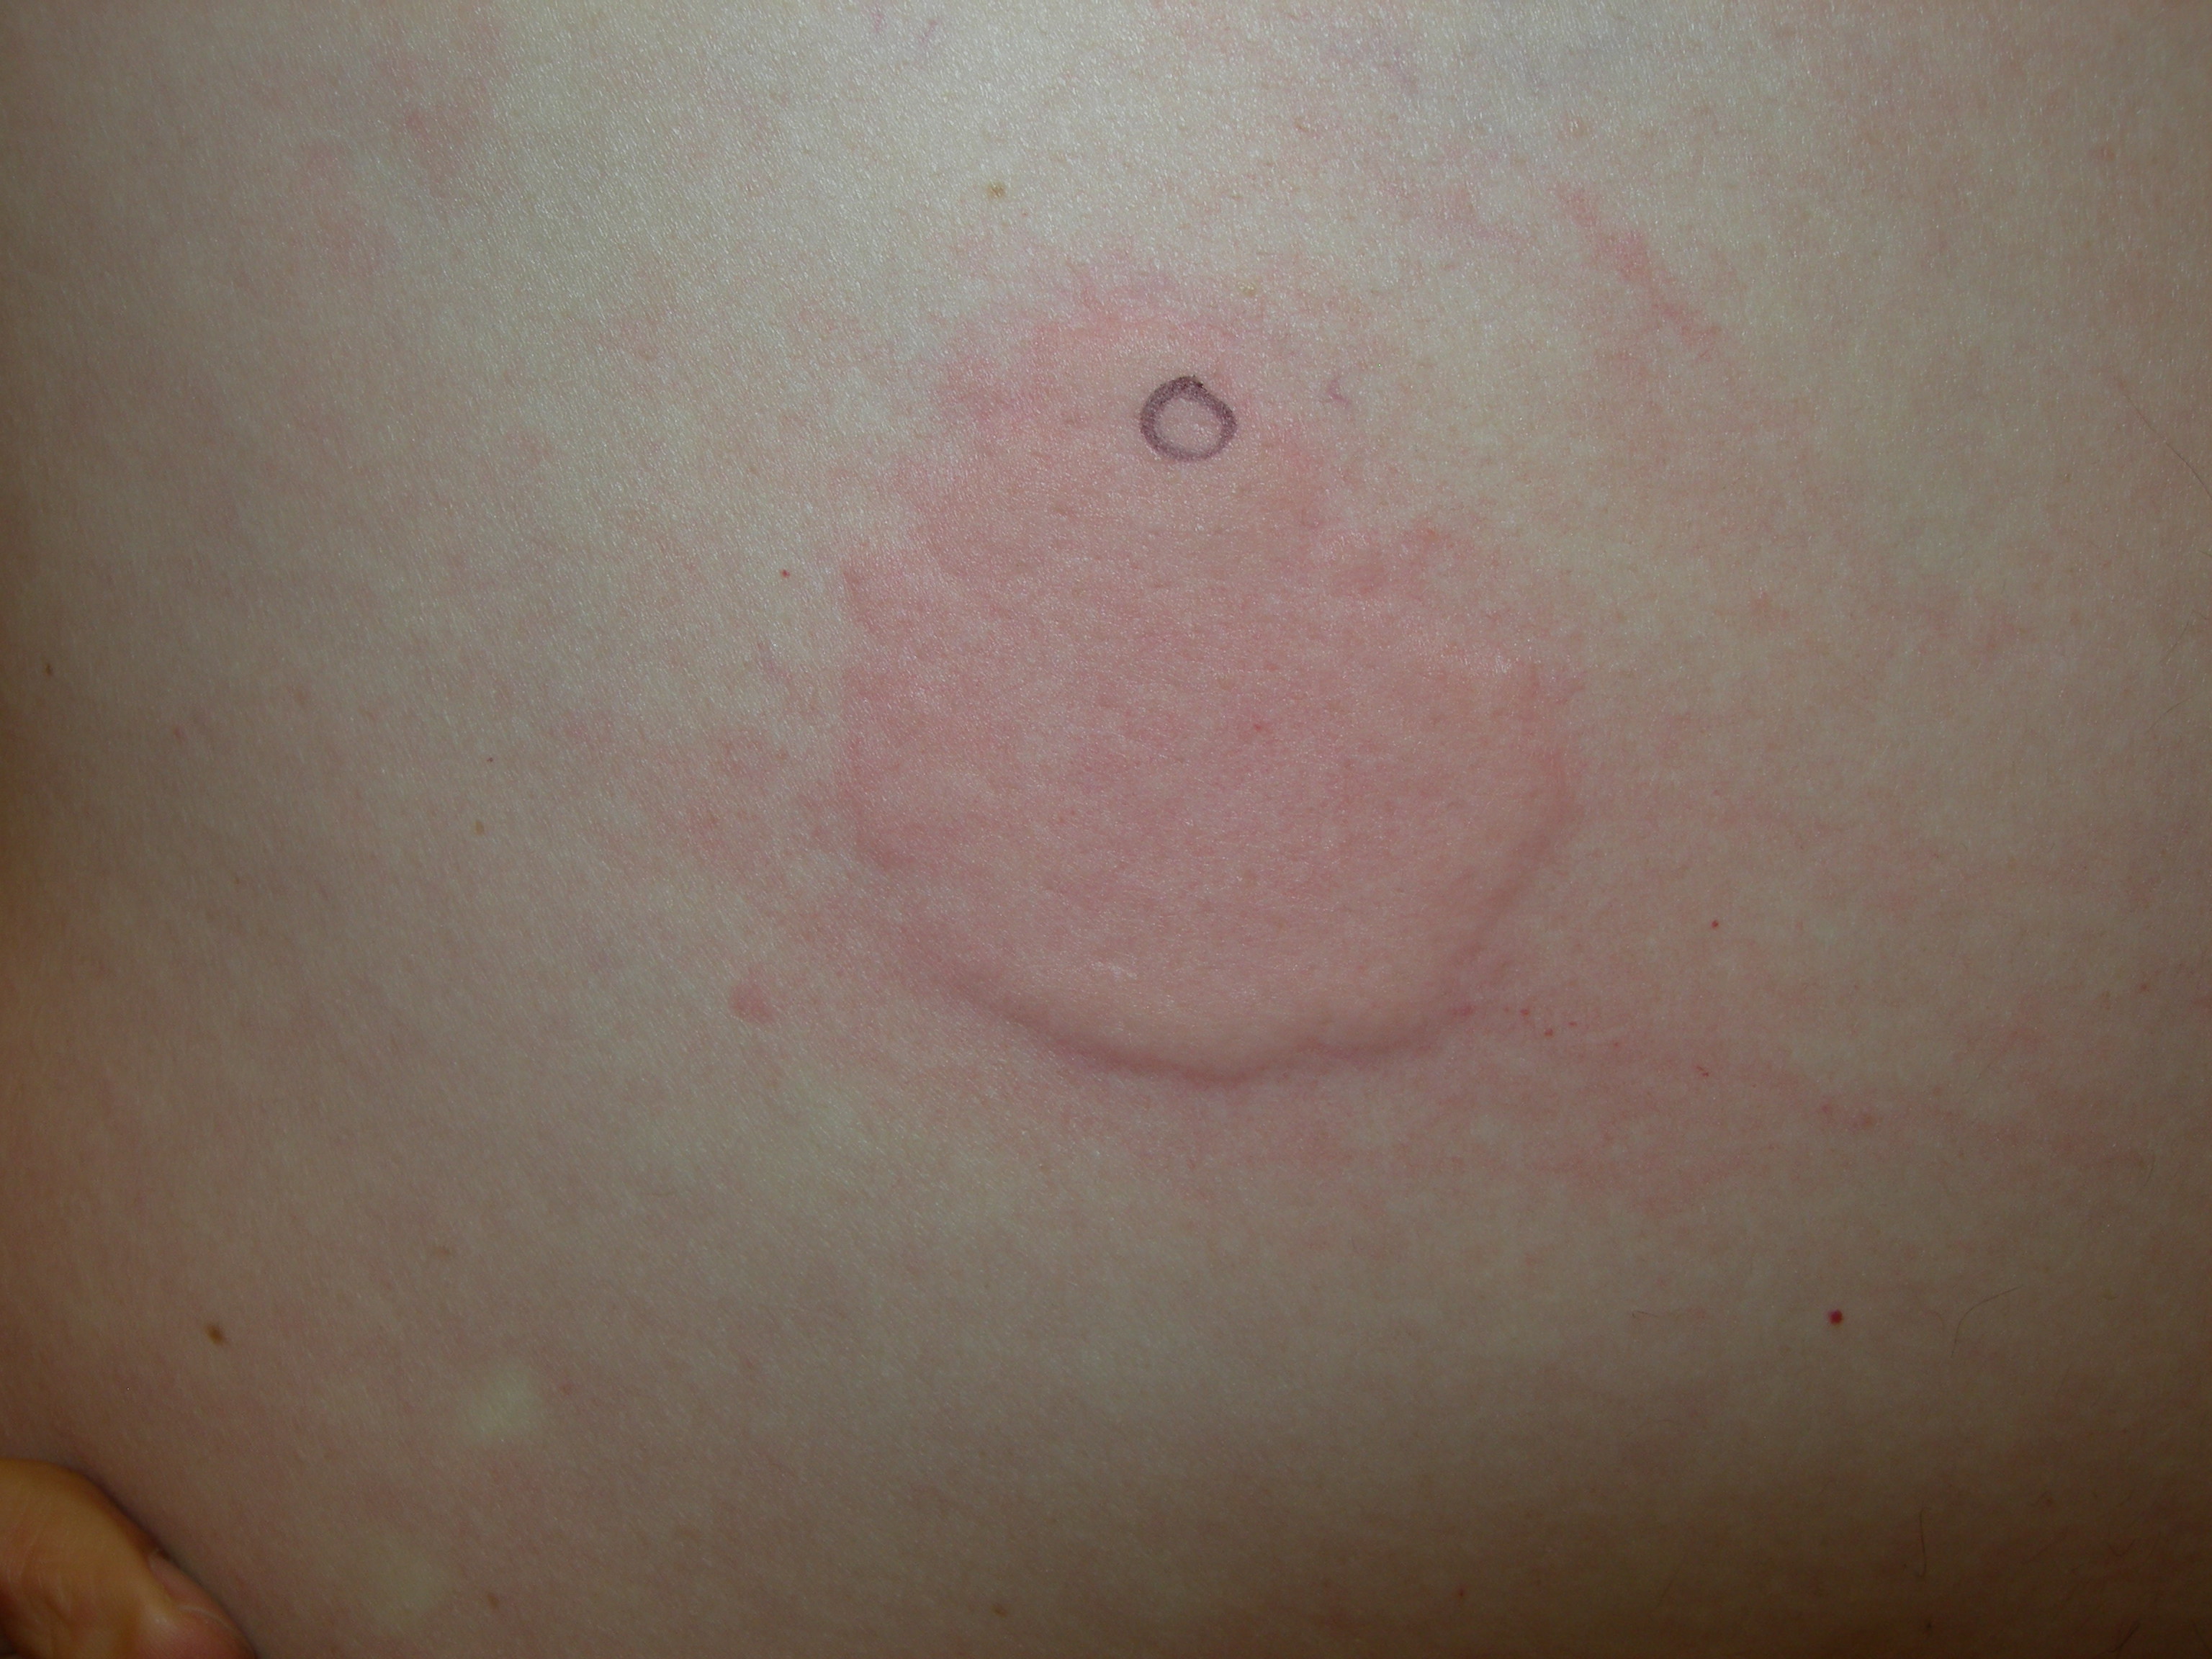 Red Circle On Skin Not Itchy Not Raised